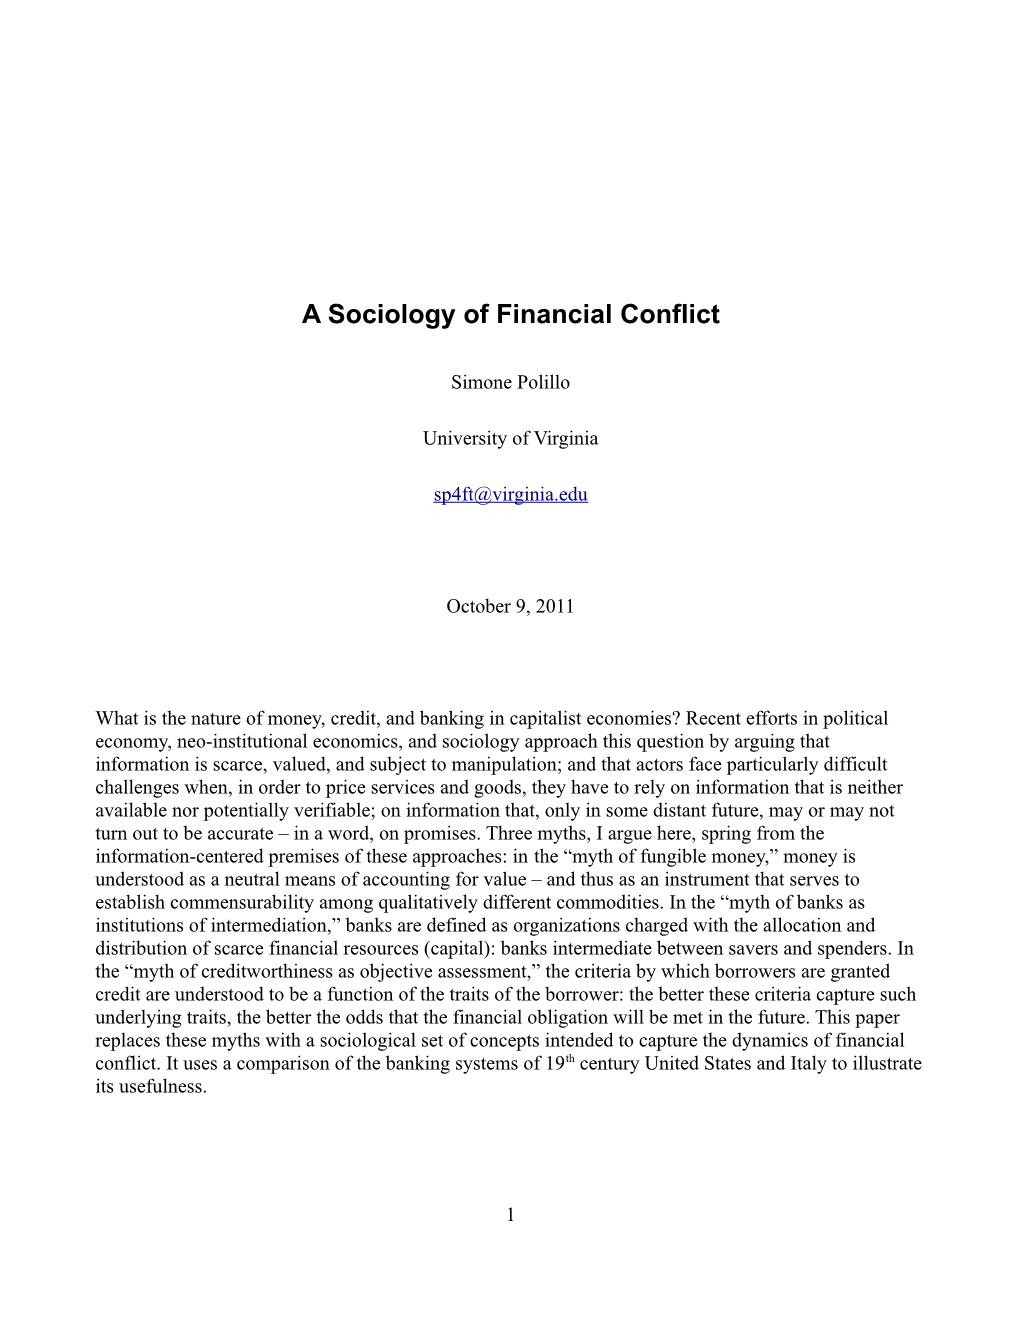 A Sociology of Financial Conflict